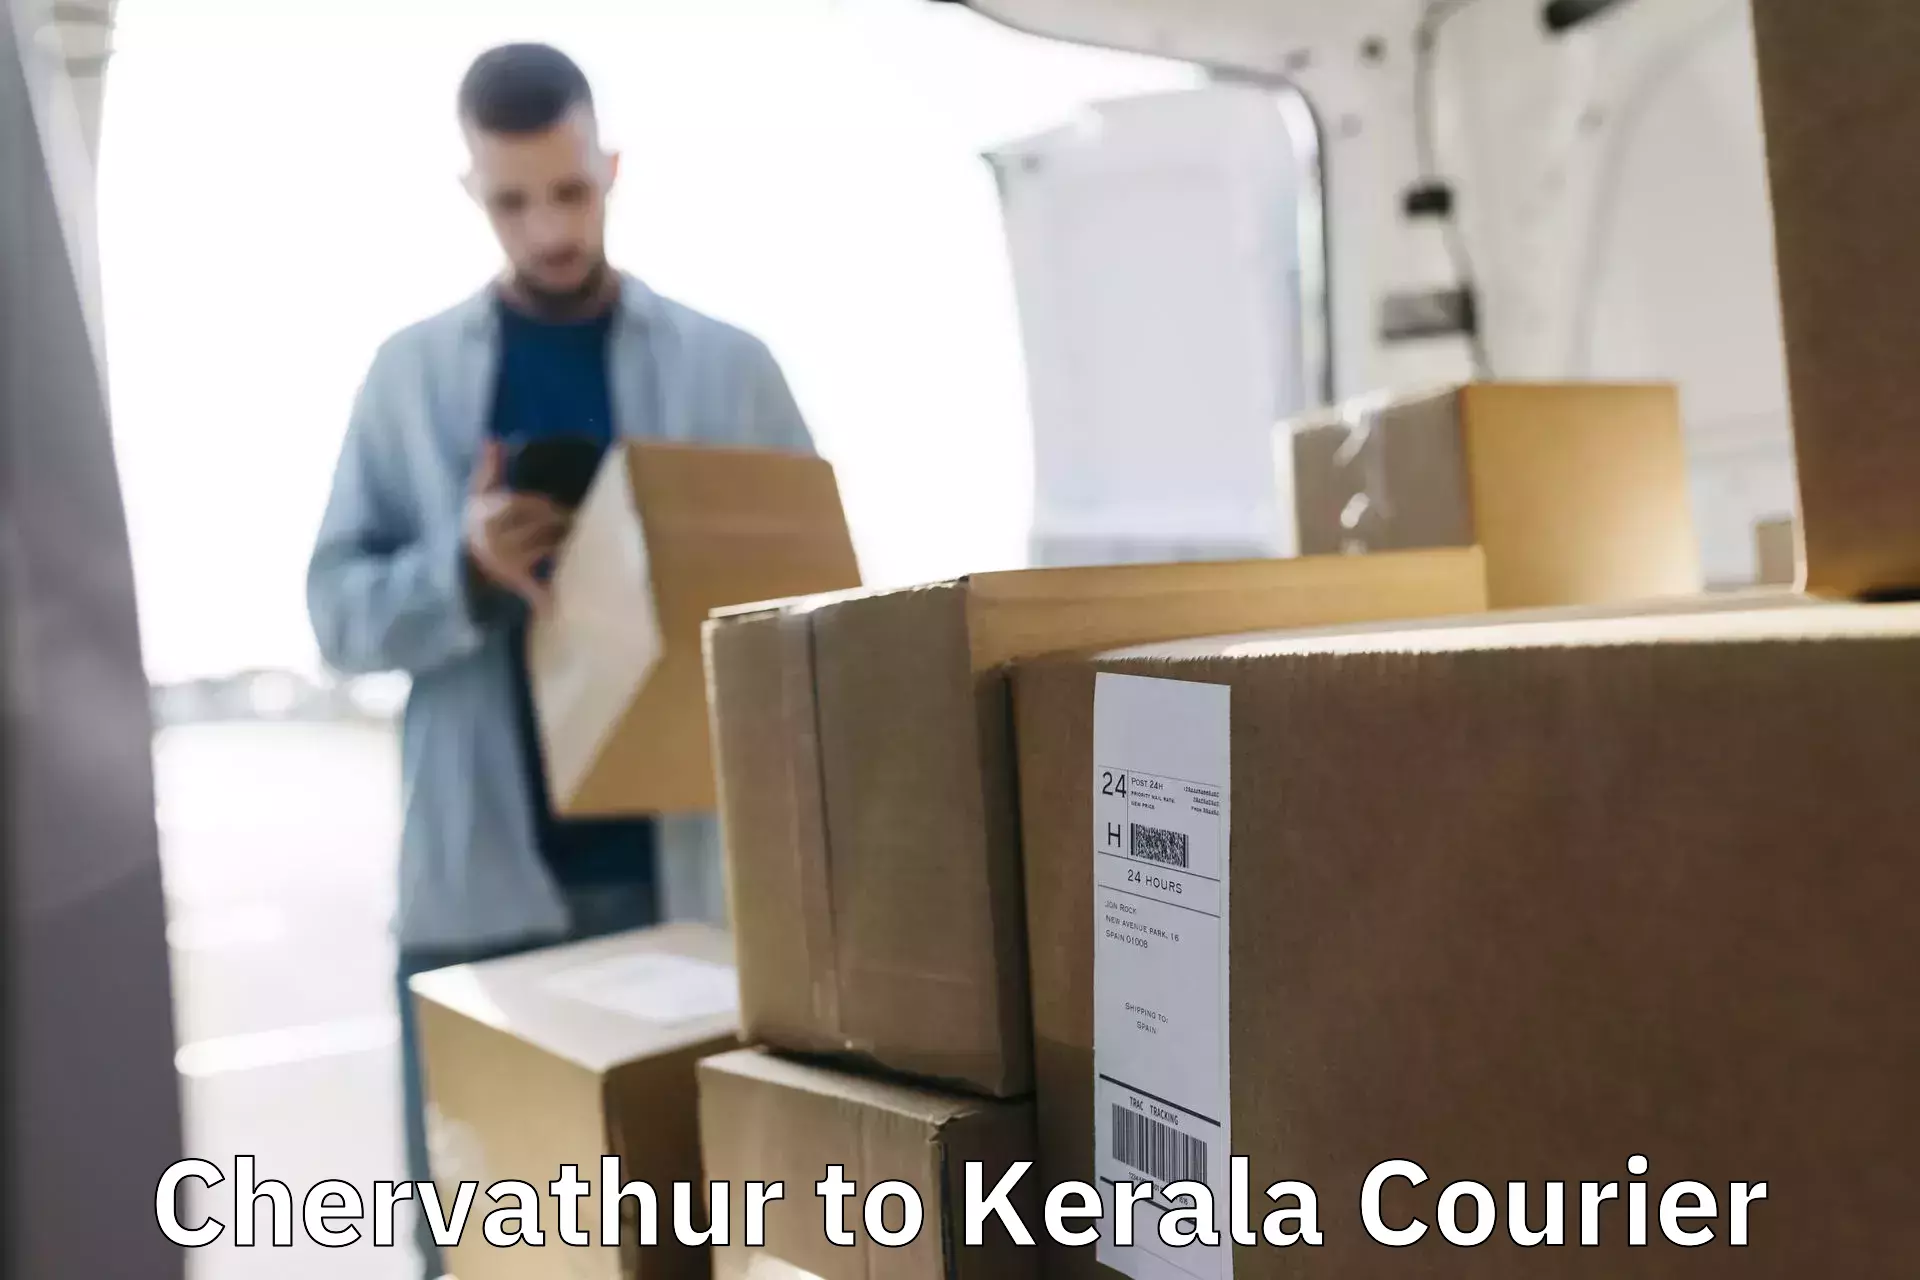 Fast delivery service Chervathur to NIT Calicut